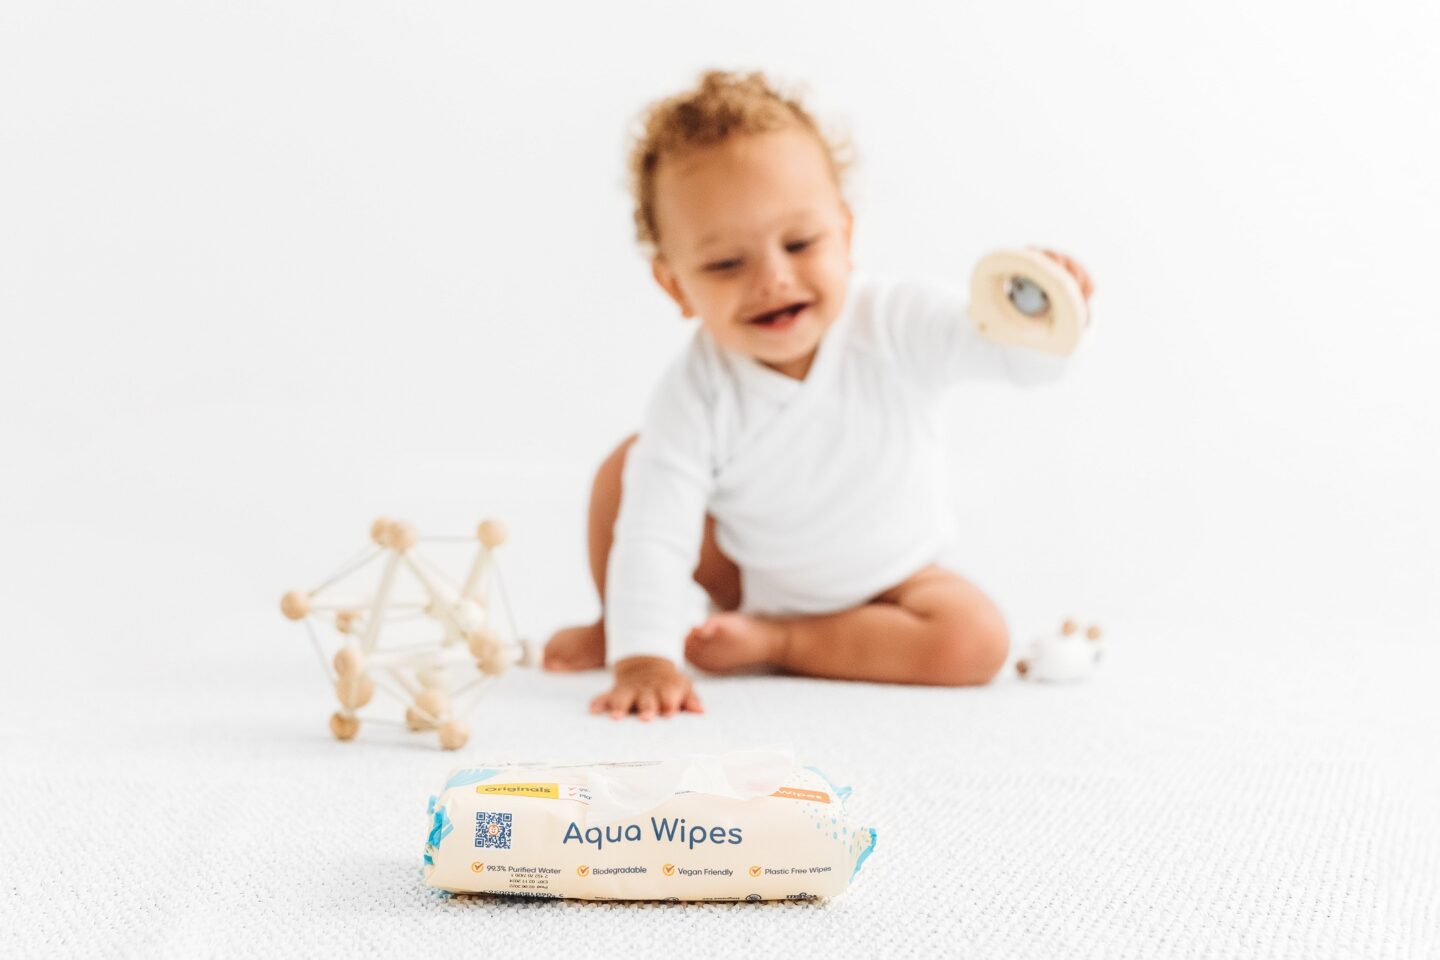 Aqua Wipes Bundle, Eco-friendly wipes, Baby Wipes, Baby products, plastic-free, biodegradable, sustainable, kids products, Xmas Giveaways, win, competition, the Frenchie Mummy, Aqua Wipes